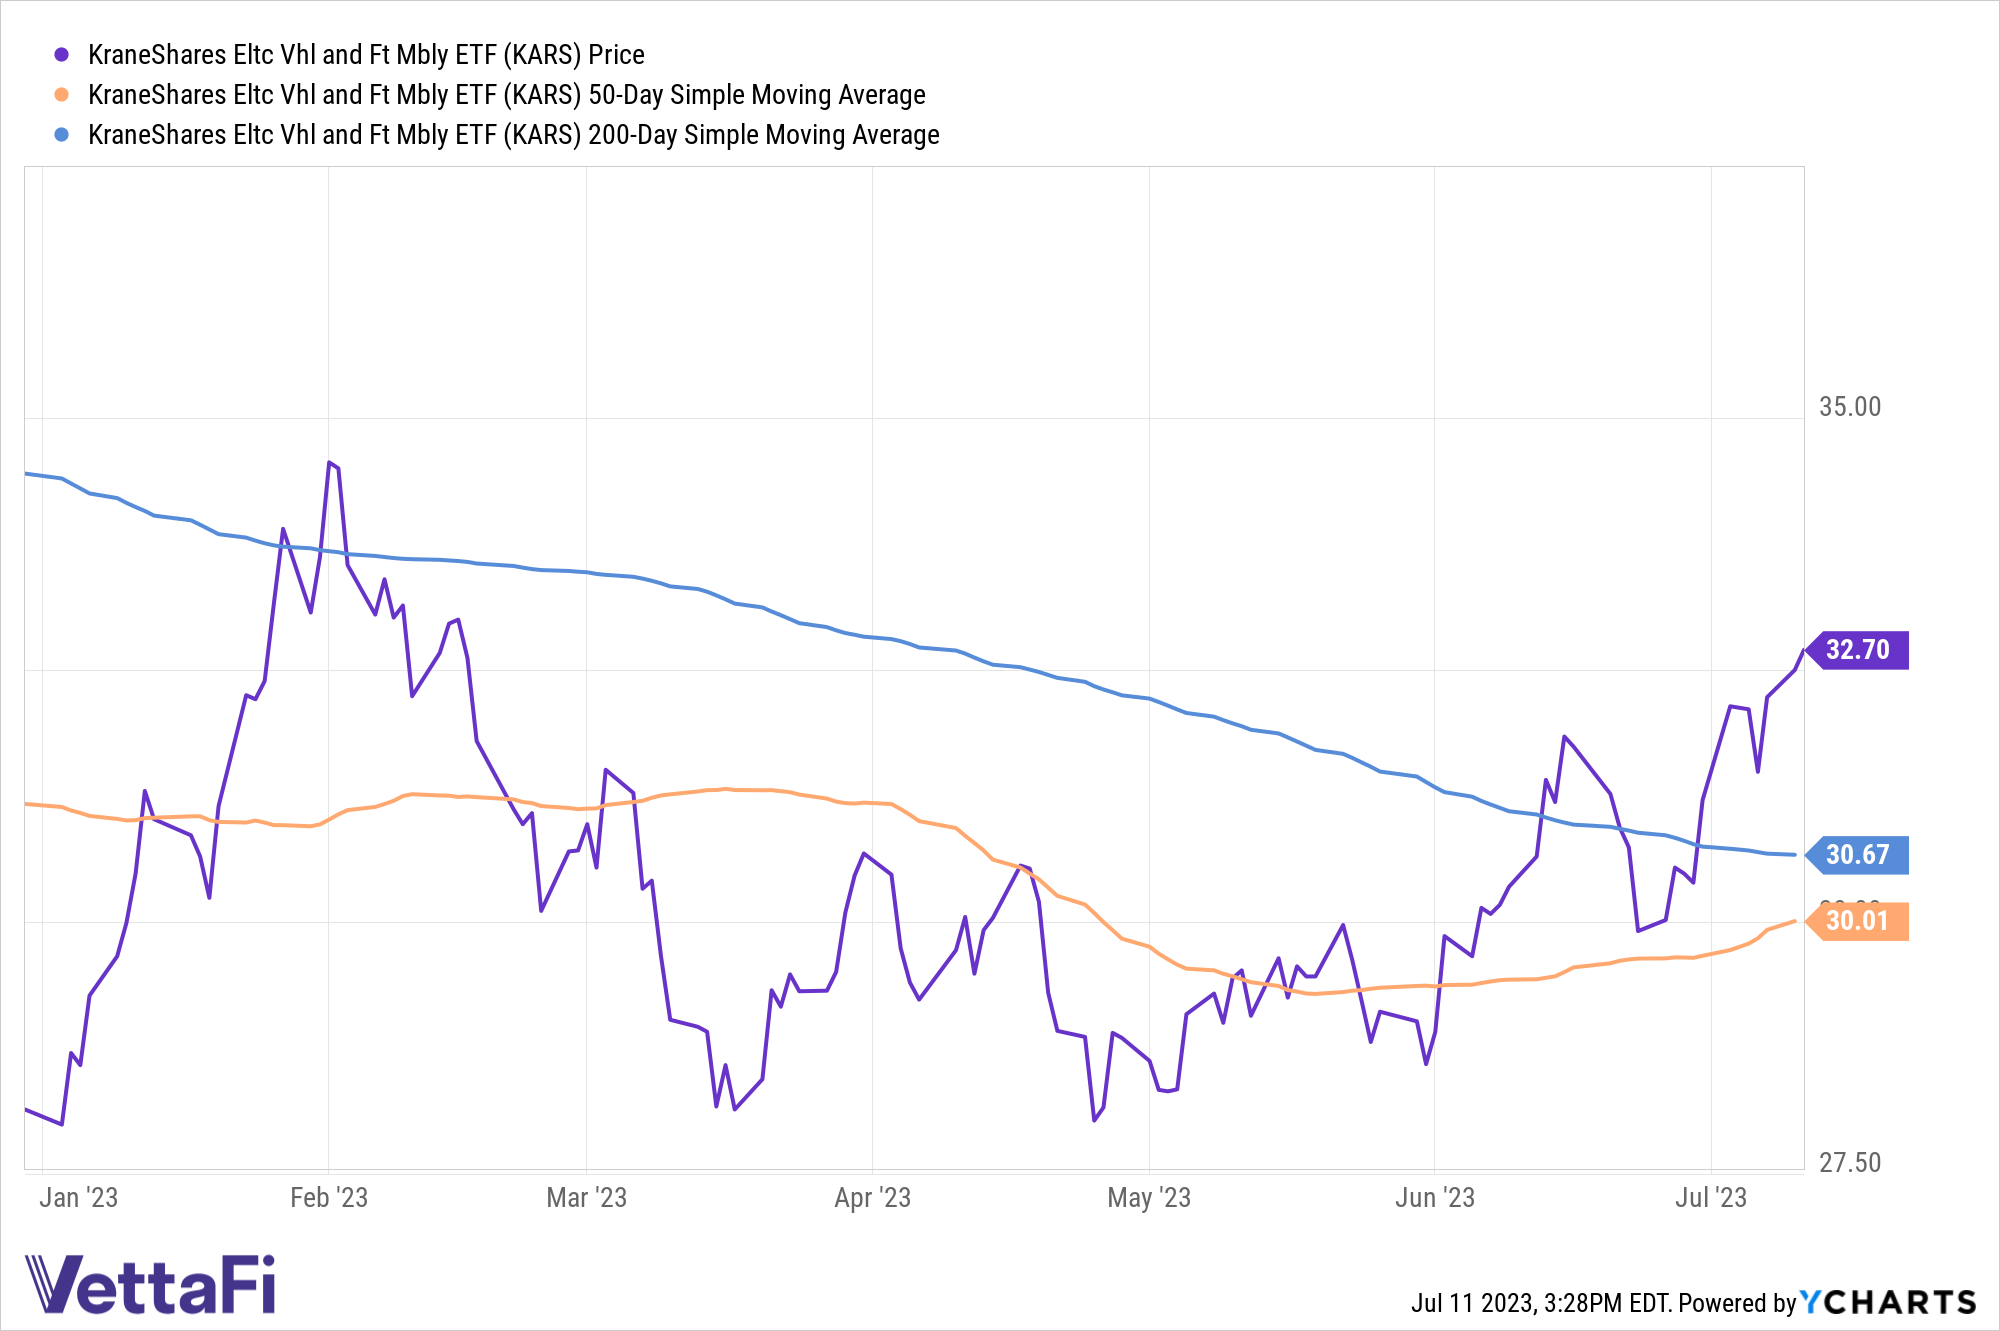 Price chart of KARS YTD, currently at 32.70, well above its 200-day SMA at 30.67 and its 50-day SMA at 30.01.